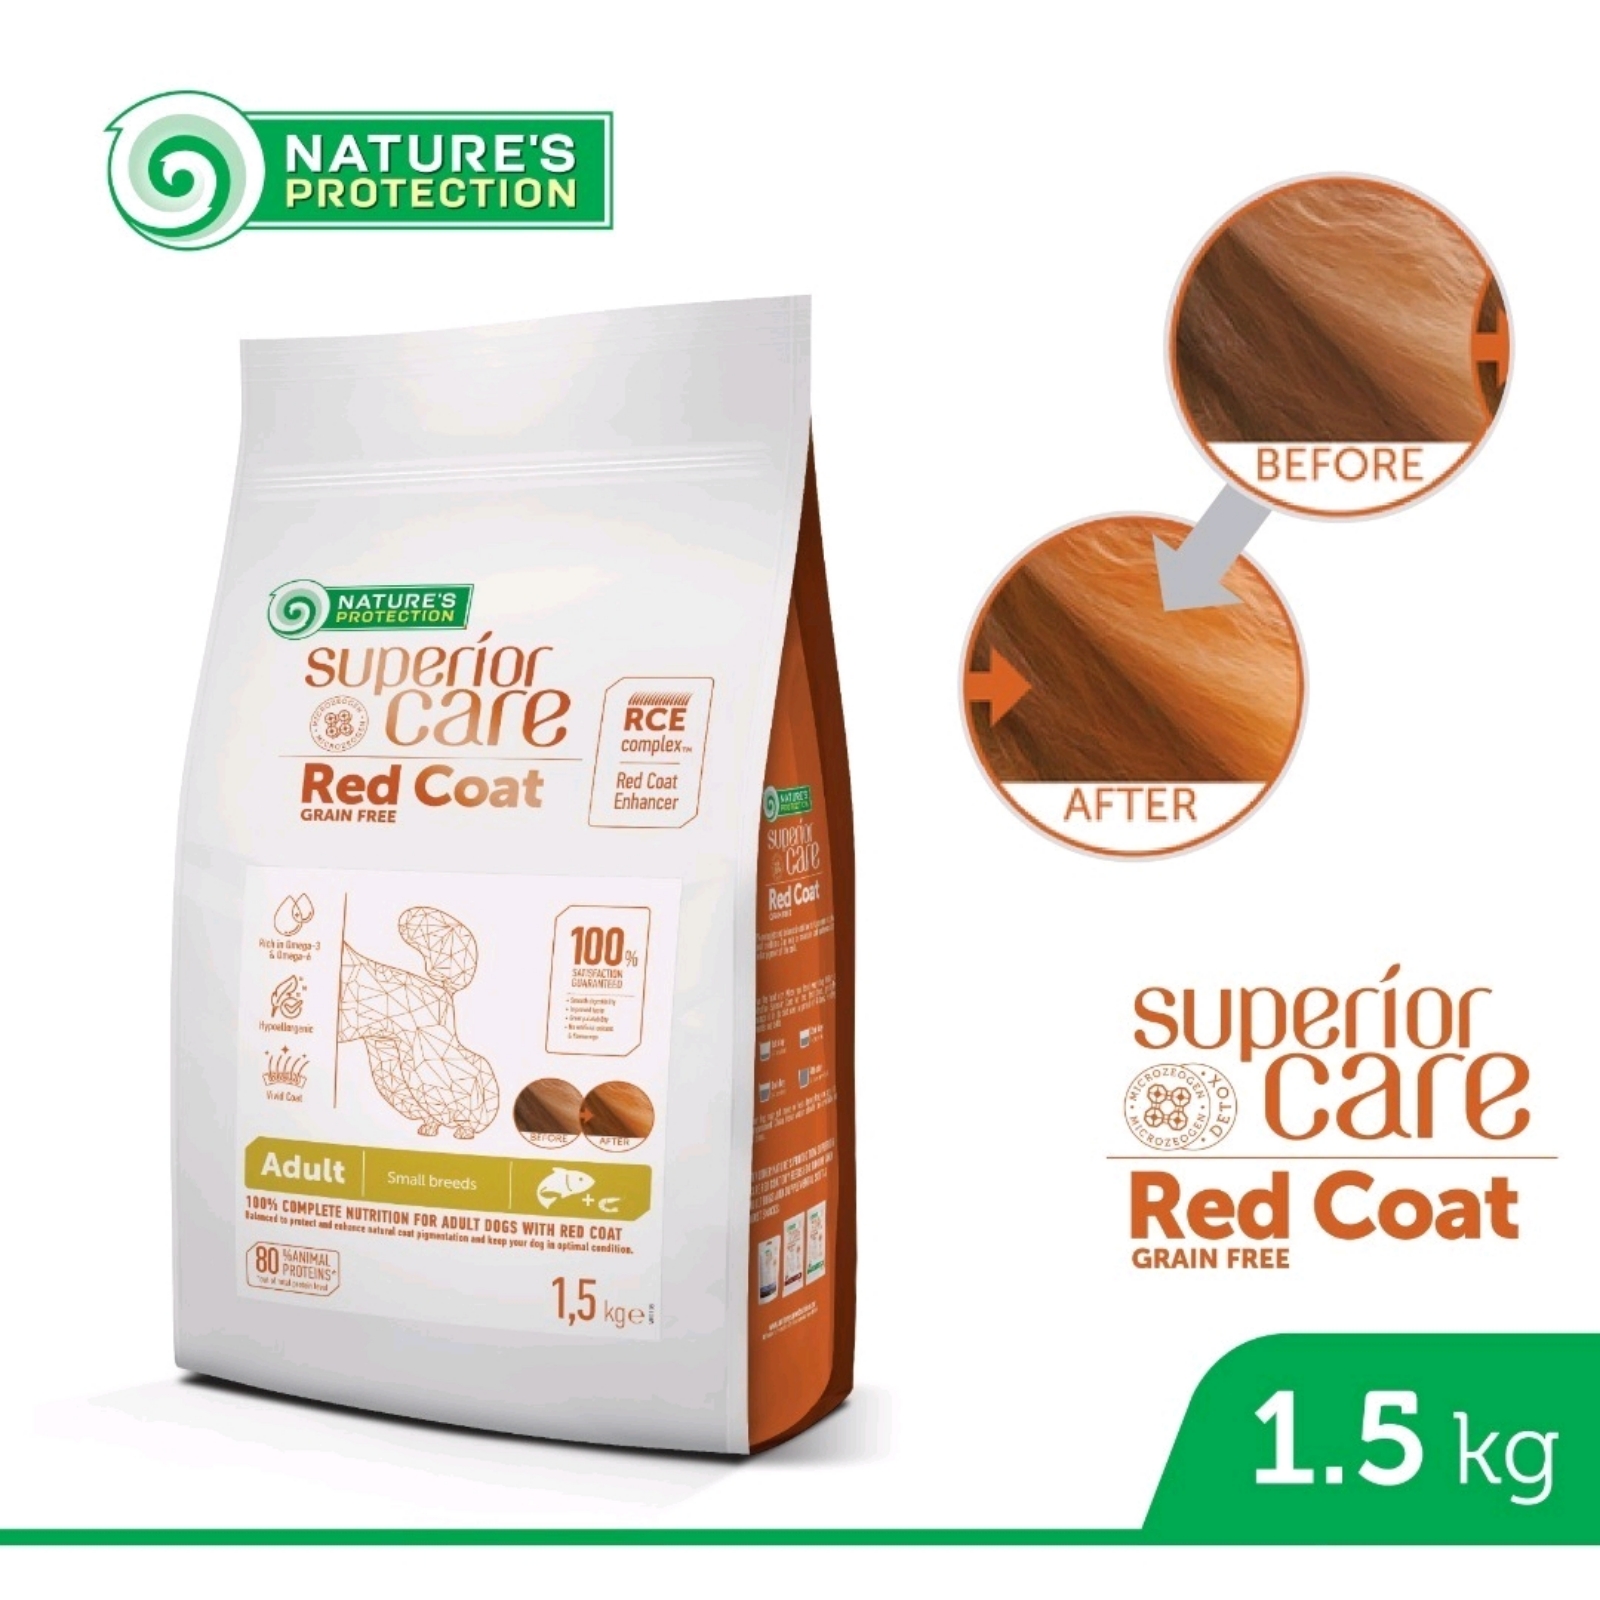 The Best Dog Food in Malaysia: Nature's Protection Red Coat and Coco and Joe Raw Food 马来西亚最佳狗粮：Nature's Protection红色或白色外套和Coco和Joe生食